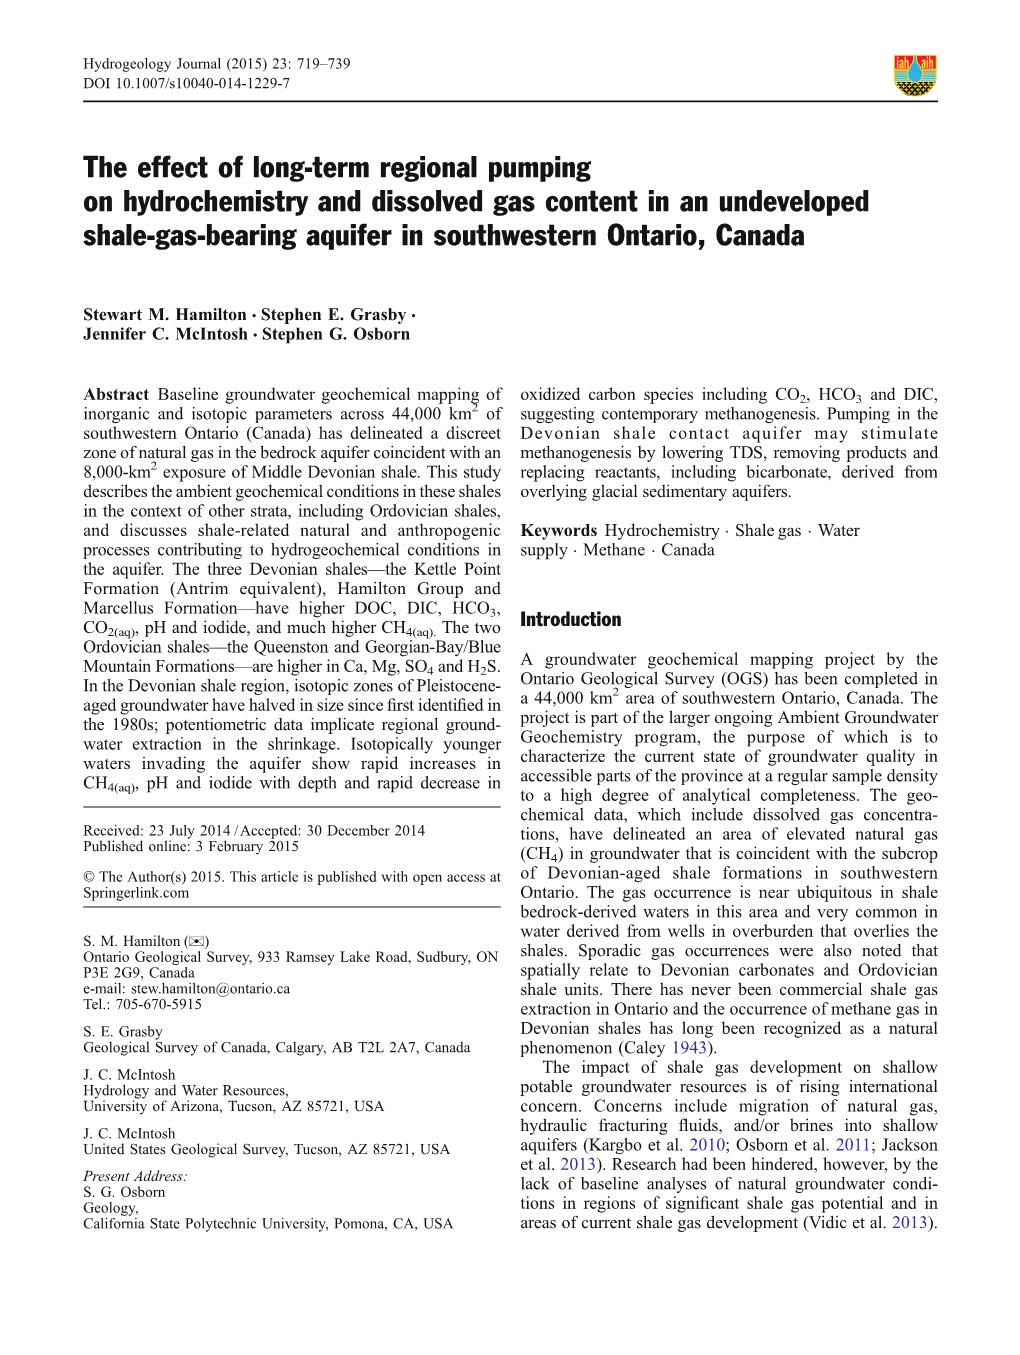 The Effect of Long-Term Regional Pumping on Hydrochemistry and Dissolved Gas Content in an Undeveloped Shale-Gas-Bearing Aquifer in Southwestern Ontario, Canada